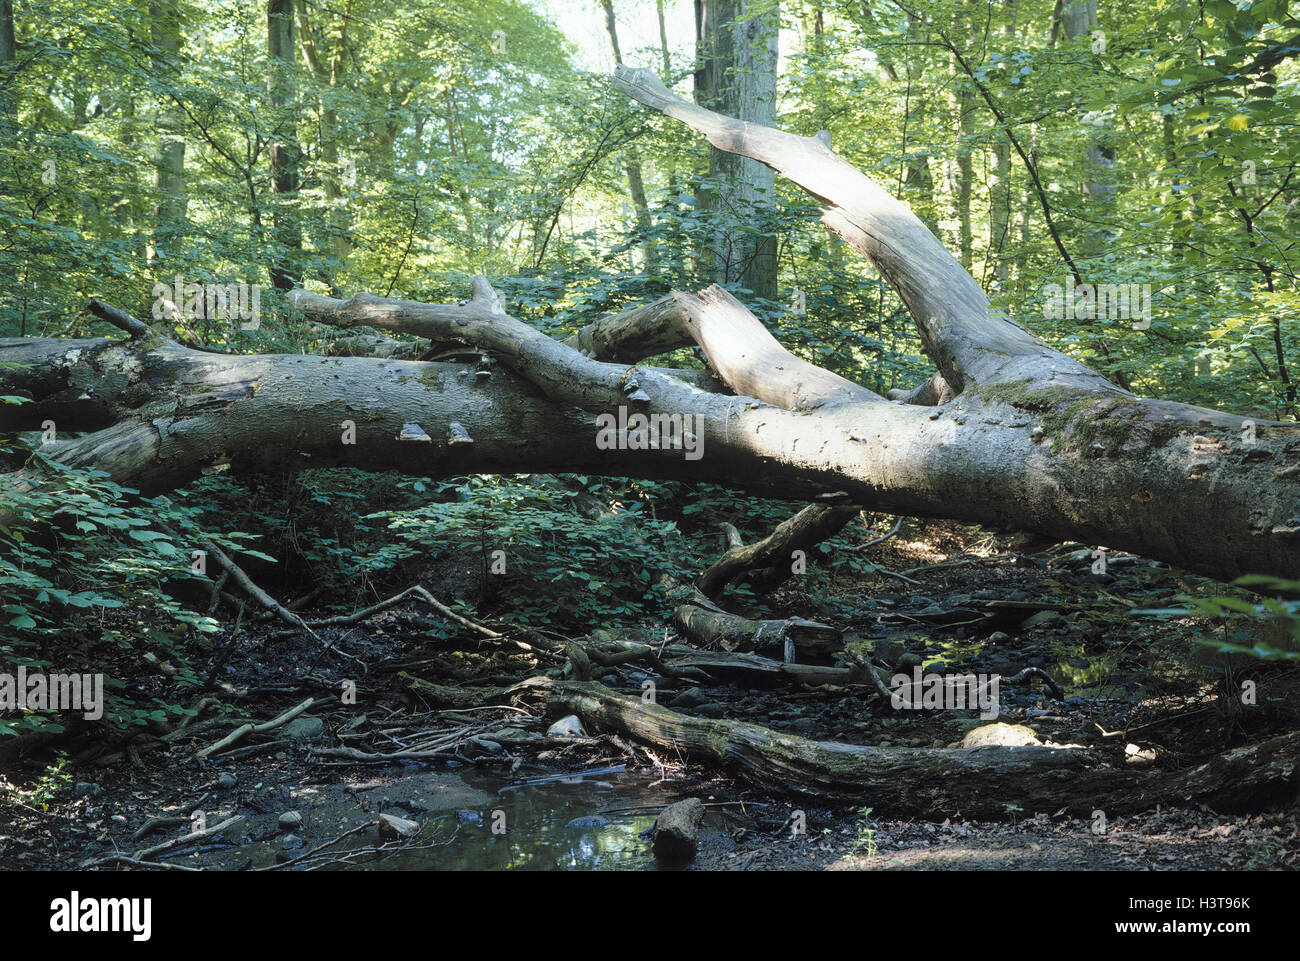 P. / national park Dylby Söderskog, deciduous forest with fallen trees Stock Photo